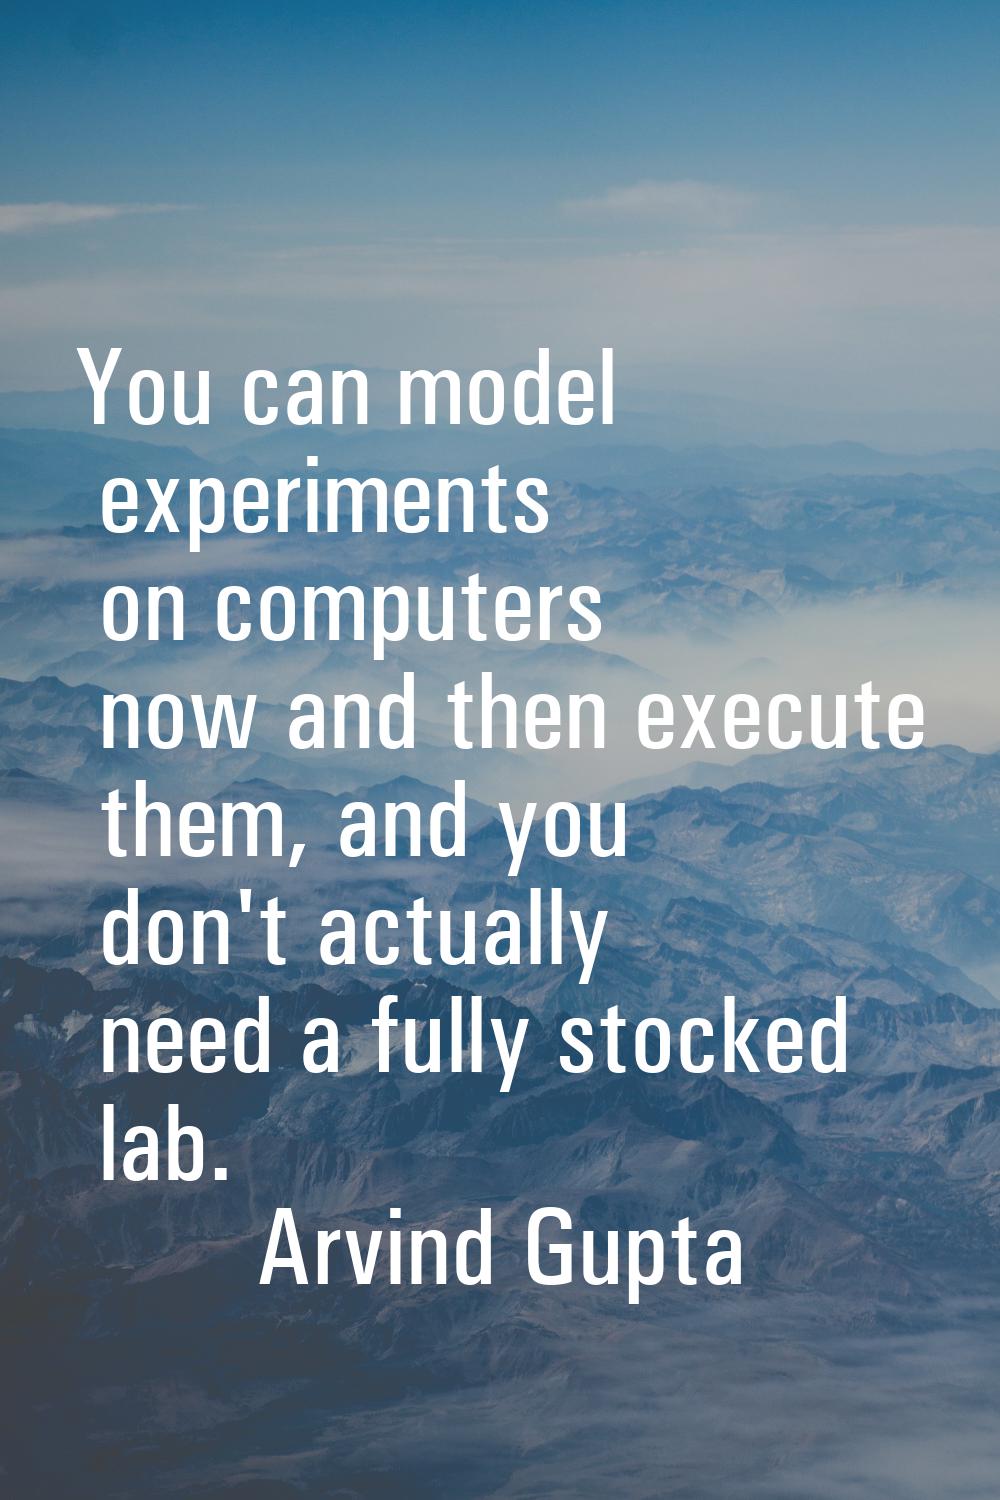 You can model experiments on computers now and then execute them, and you don't actually need a ful